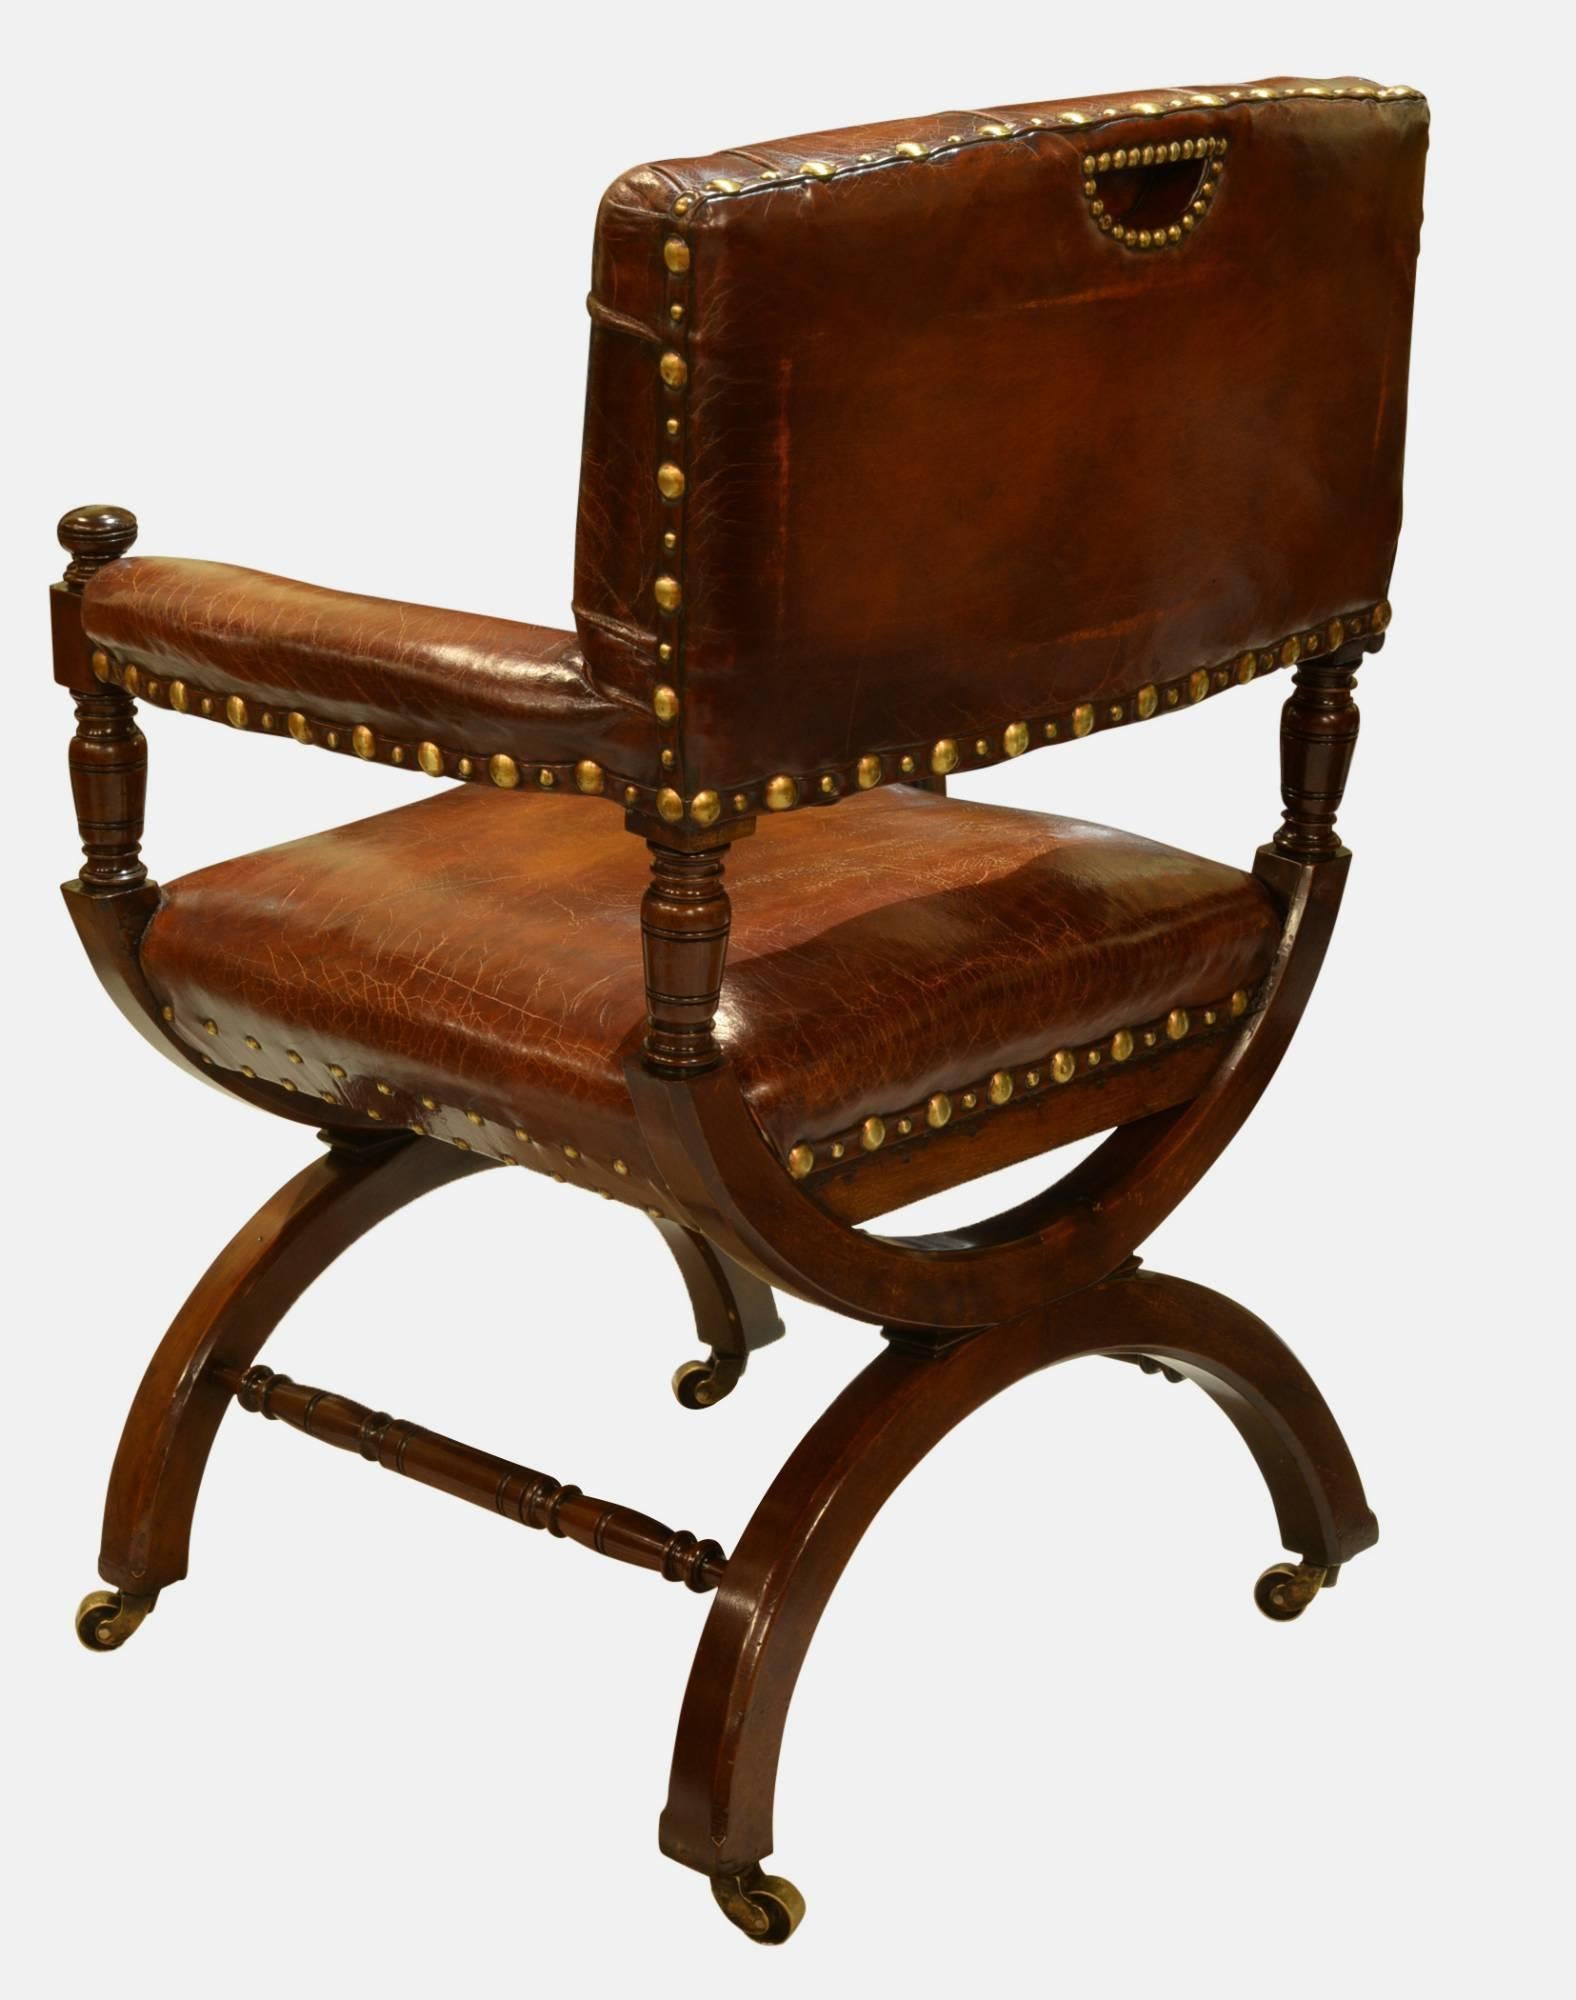 A stunning pair of 19th Century mahogany X-frame library chairs in hand dyed leather after a Gillows design,

circa 1890.